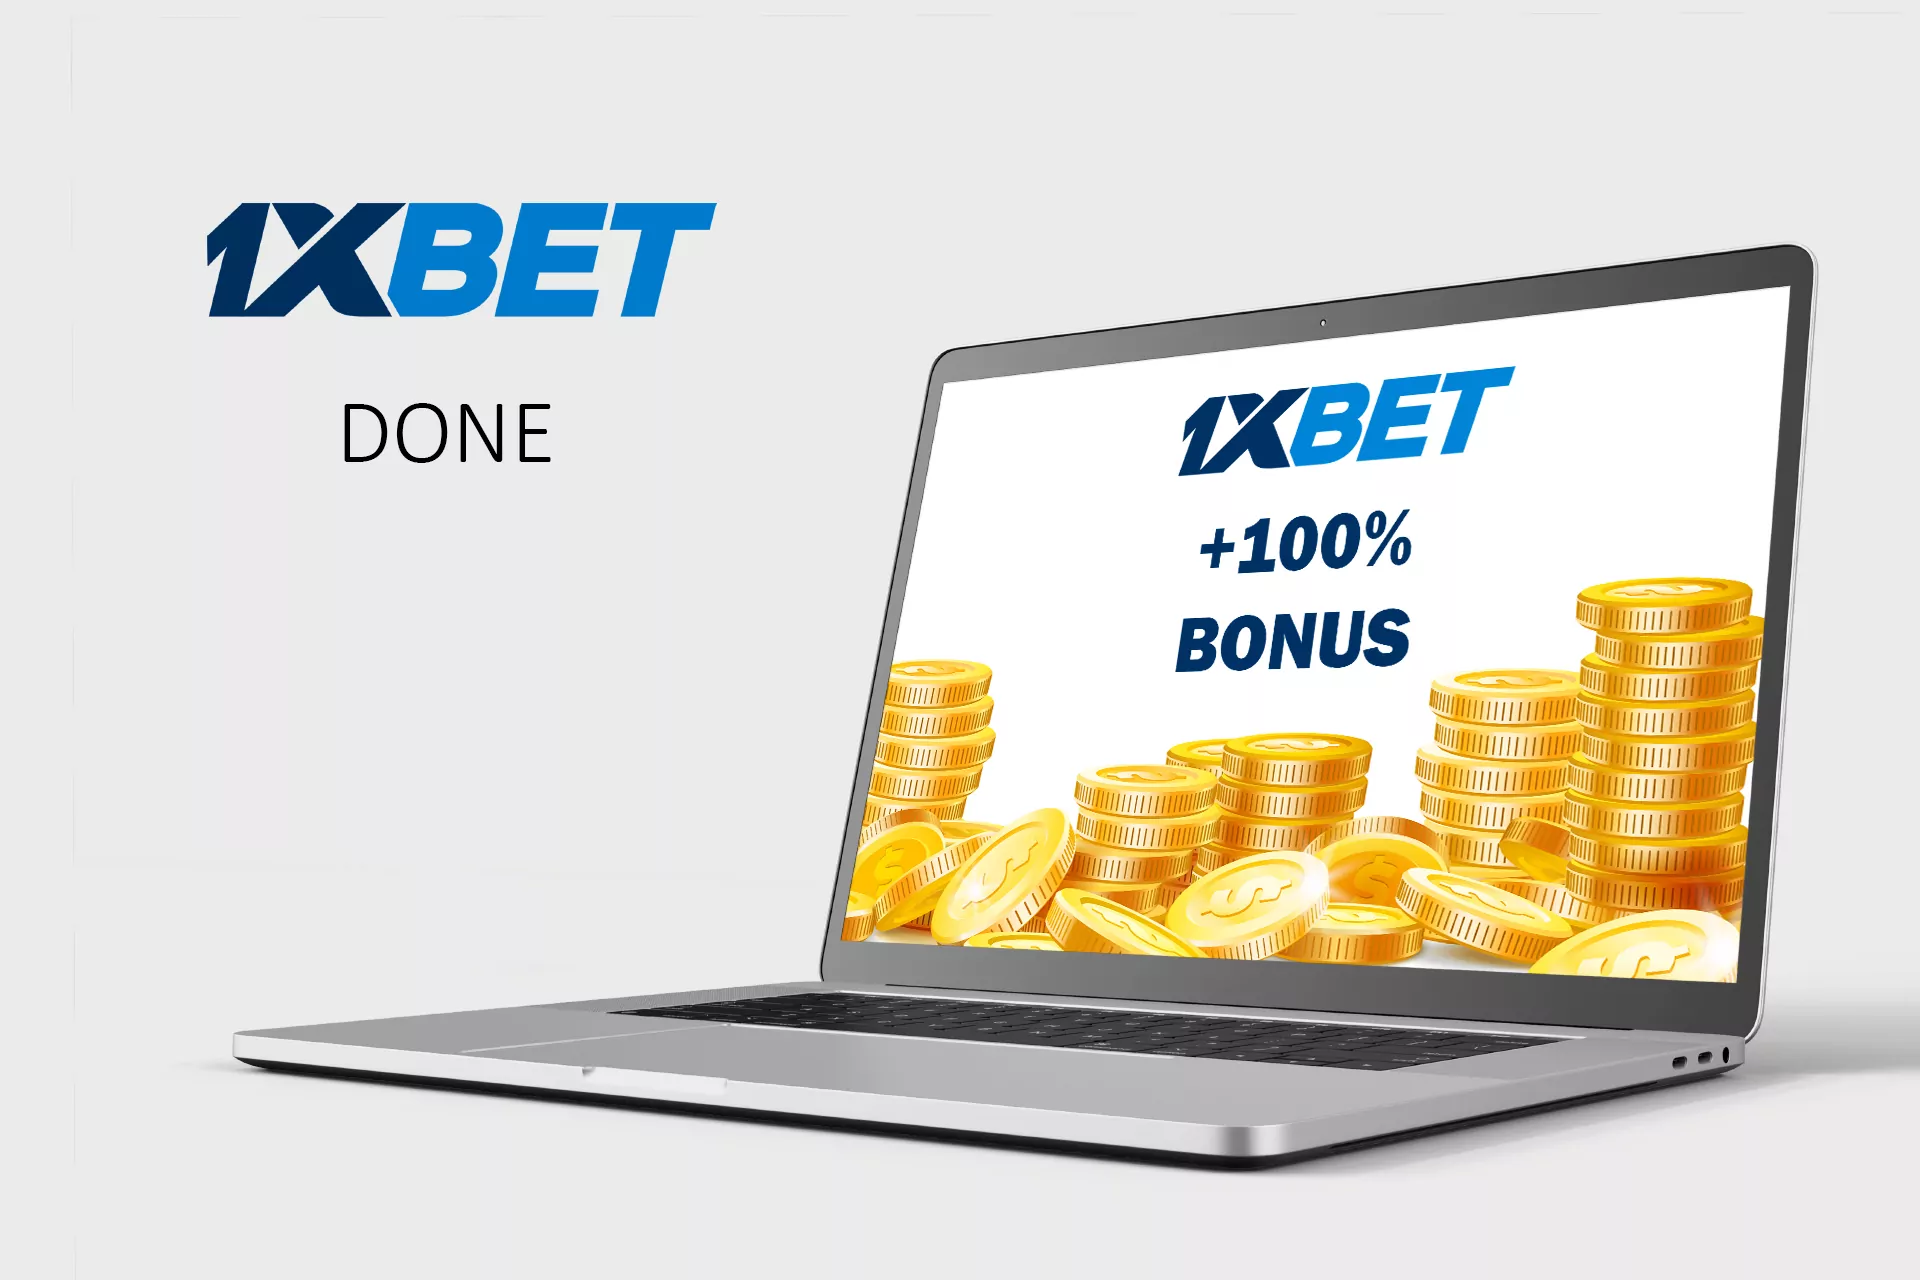 Get the welcome bonus from 1xBet and spend it on bets.